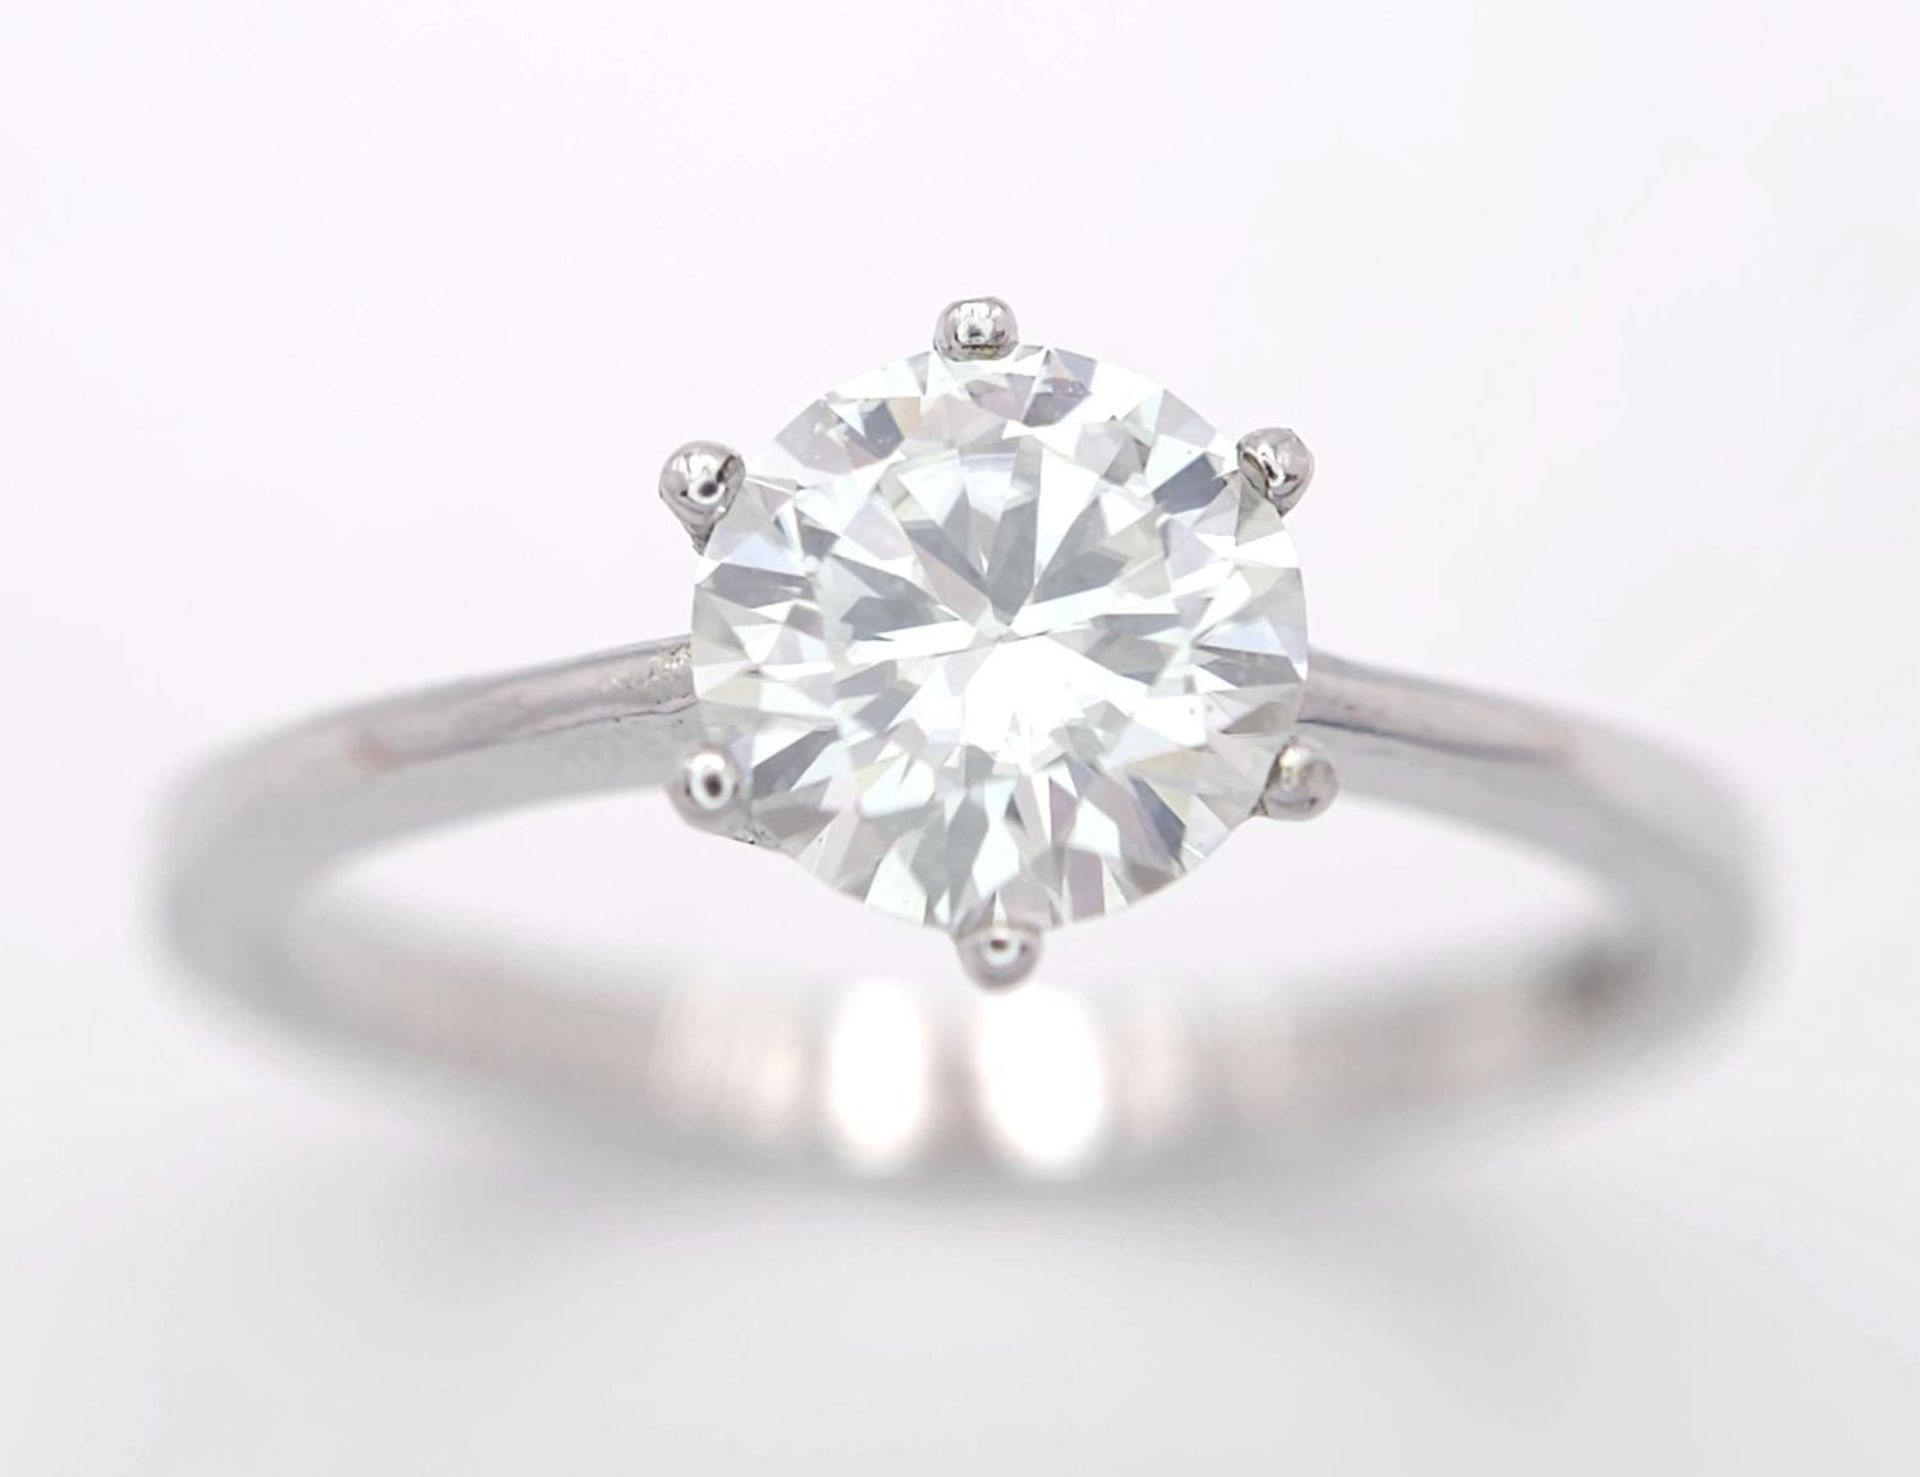 A 1ct Moissanite 925 Silver Ring. Size N. Comes with a GRA certificate.